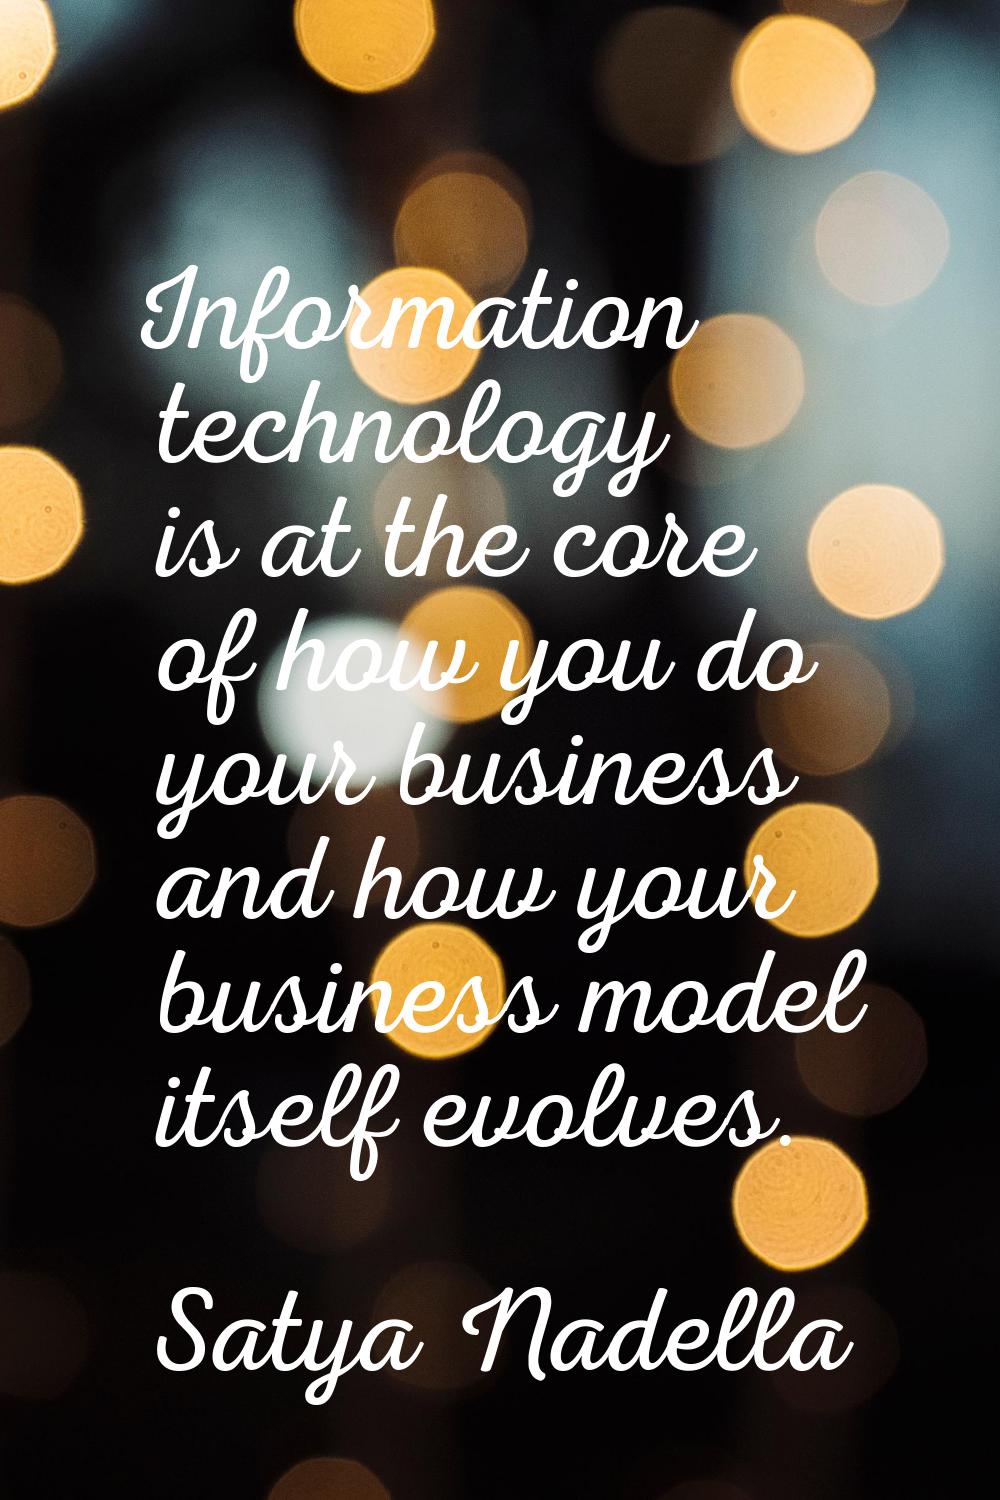 Information technology is at the core of how you do your business and how your business model itsel